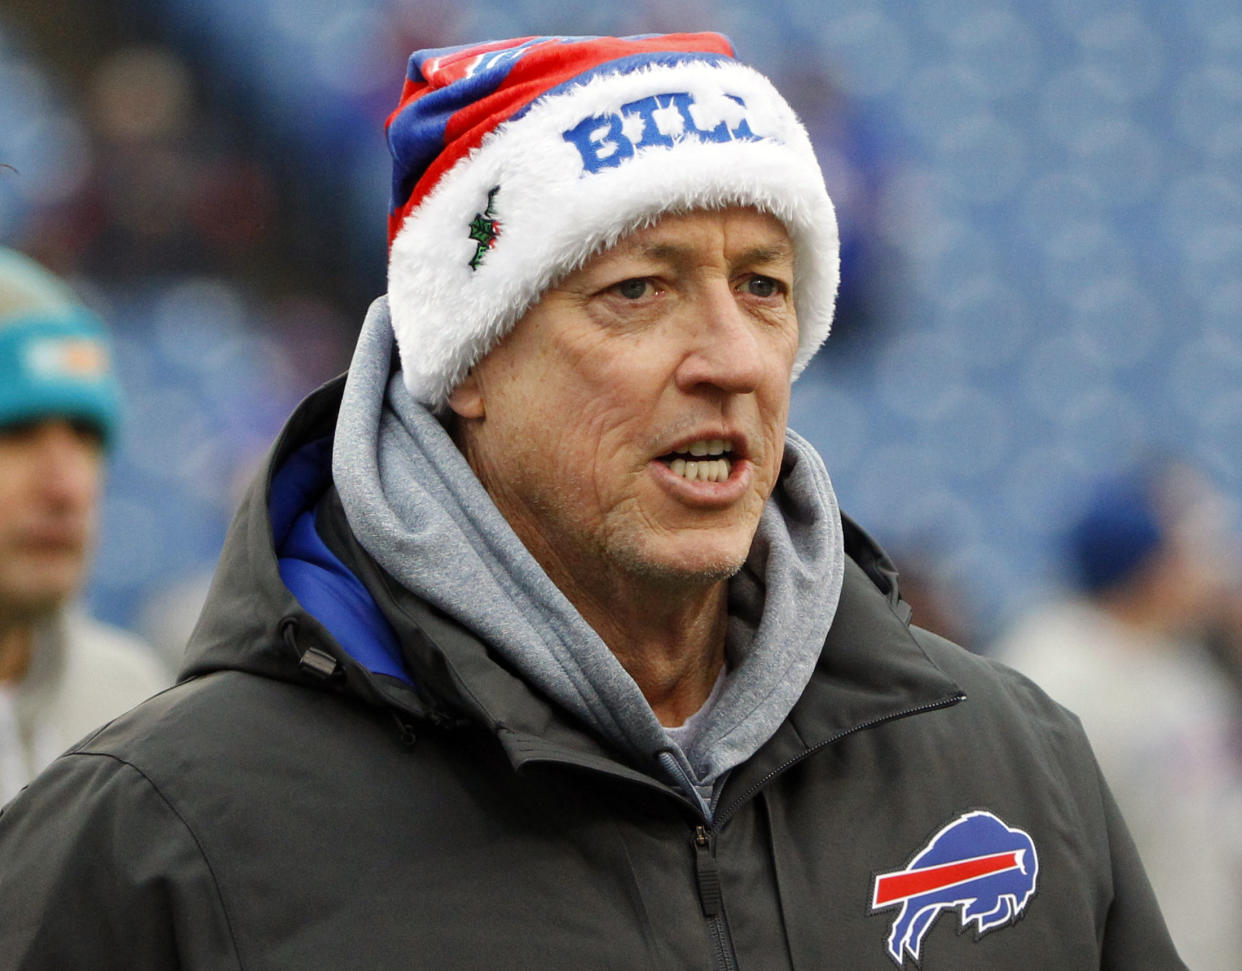 Jim Kelly had 12 hours of surgery Wednesday night to remove oral cancer. (AP)